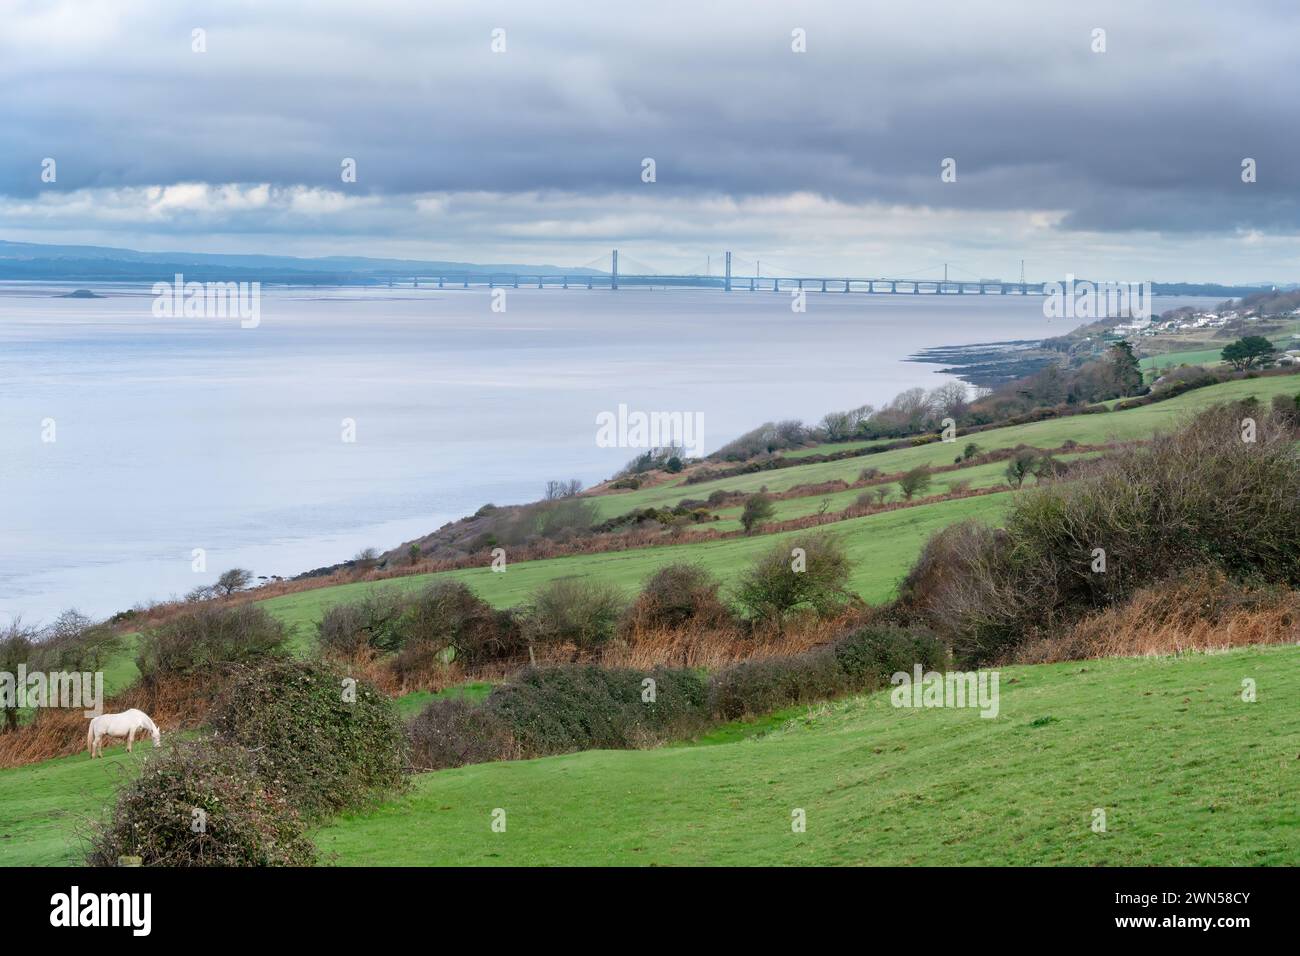 A view across fields back along the Severn River Estuary from Clevedon, towards the Prince of Wales Bridge crossing from England to Wales Stock Photo